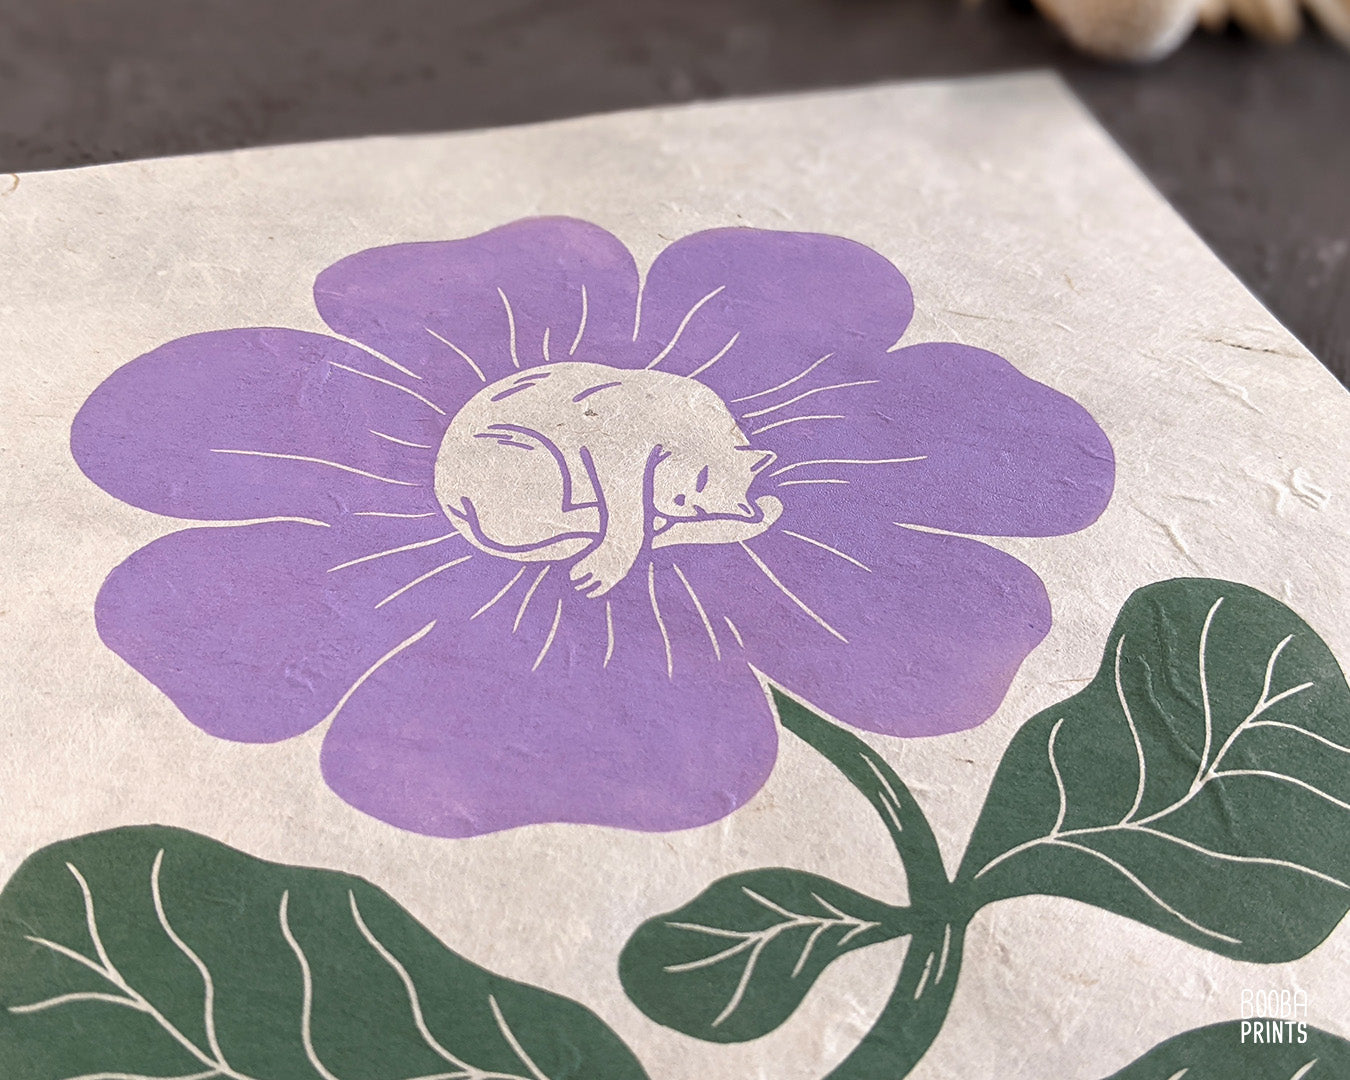 Handmade original linocut print of my Flower Cat design, printed in green and purple/mustard with oil based ink on natural Lokta paper. Gift for cat lover and flower lover. Perfect print for your home decor. Studio decor, cute boho print for home decor by Booba Prints